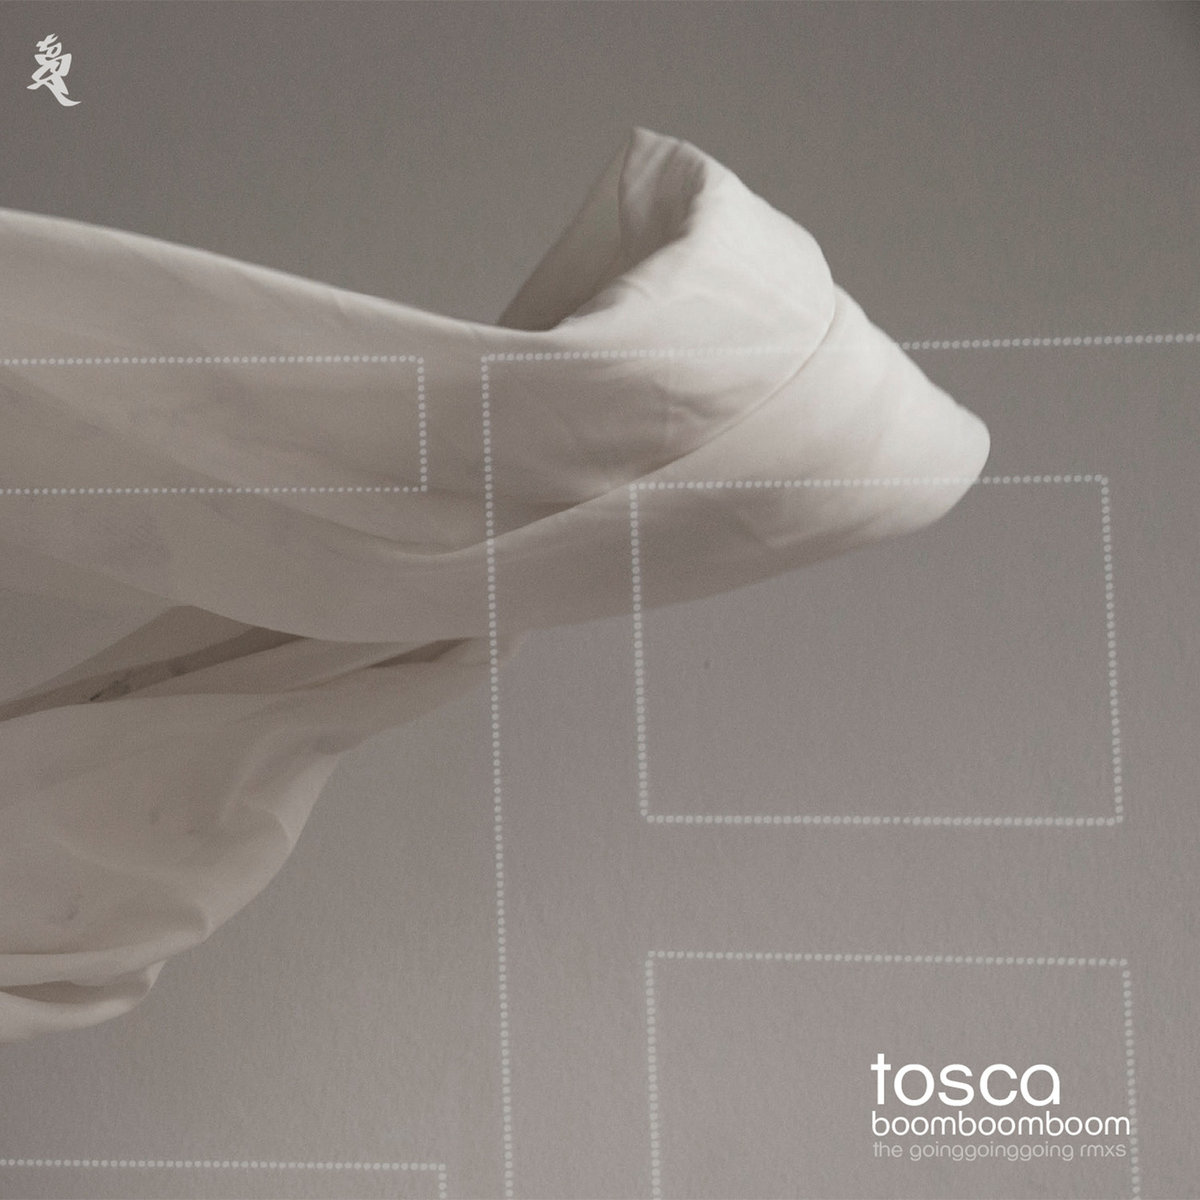 TOSCA / トスカ / BOOM BOOM BOOM (THE GOING GOING GOING REMIXES)